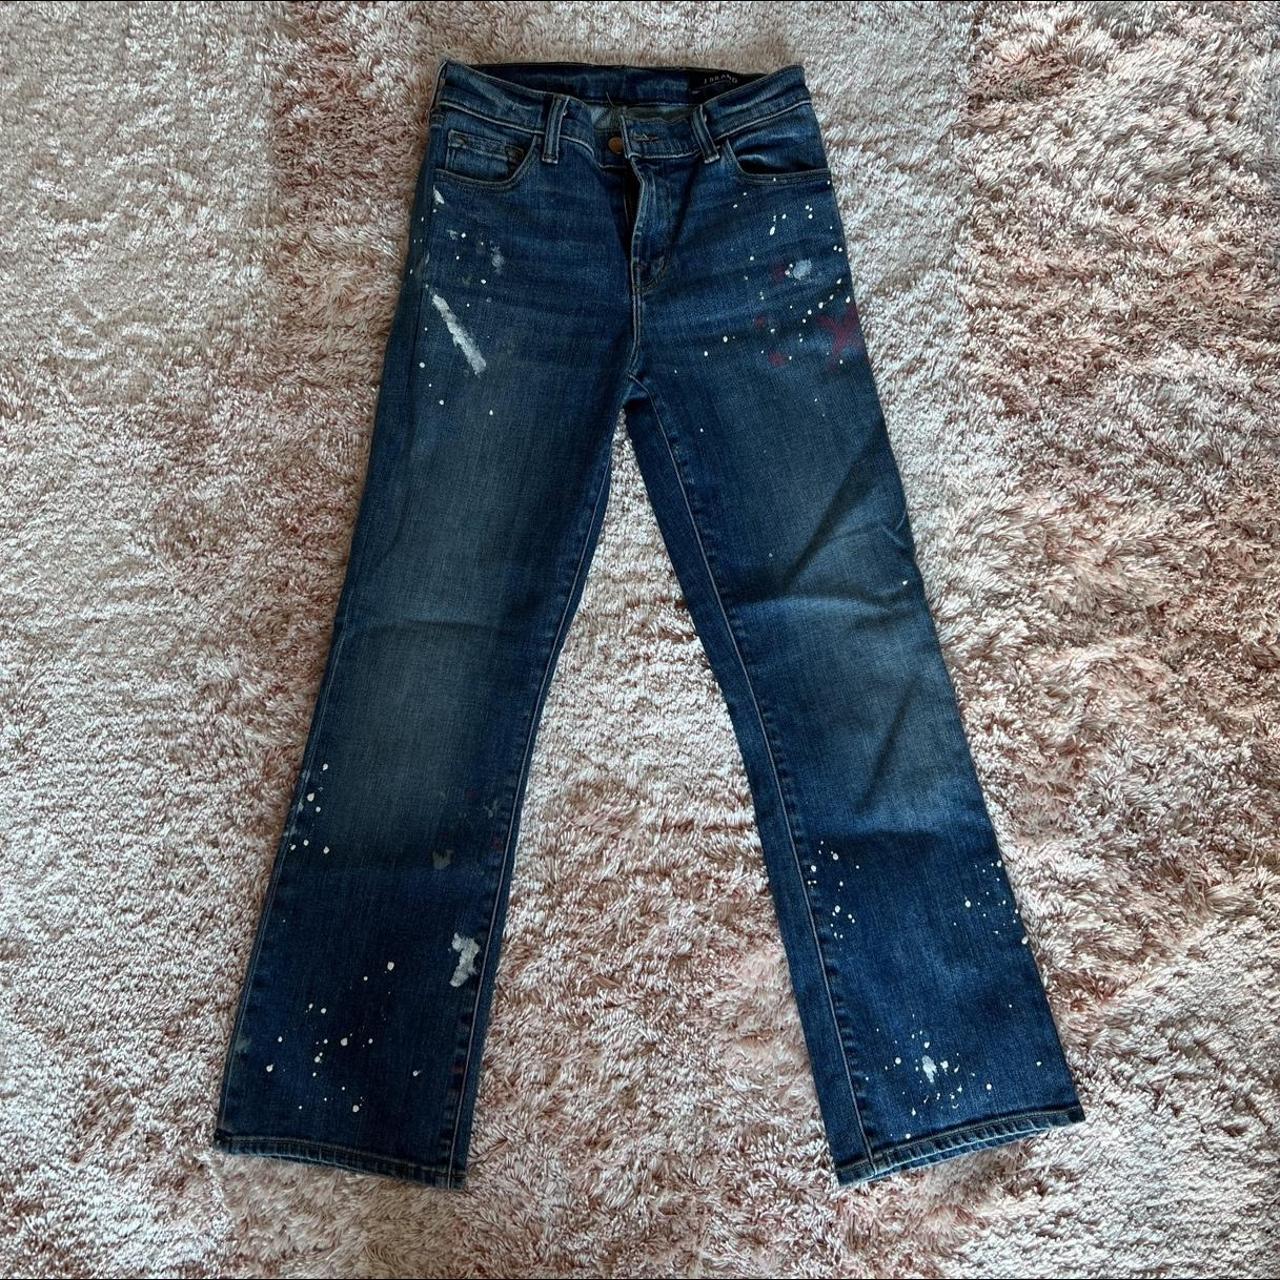 J BRAND PAINTED JEANS. Low to mid rise, size 26. - Depop